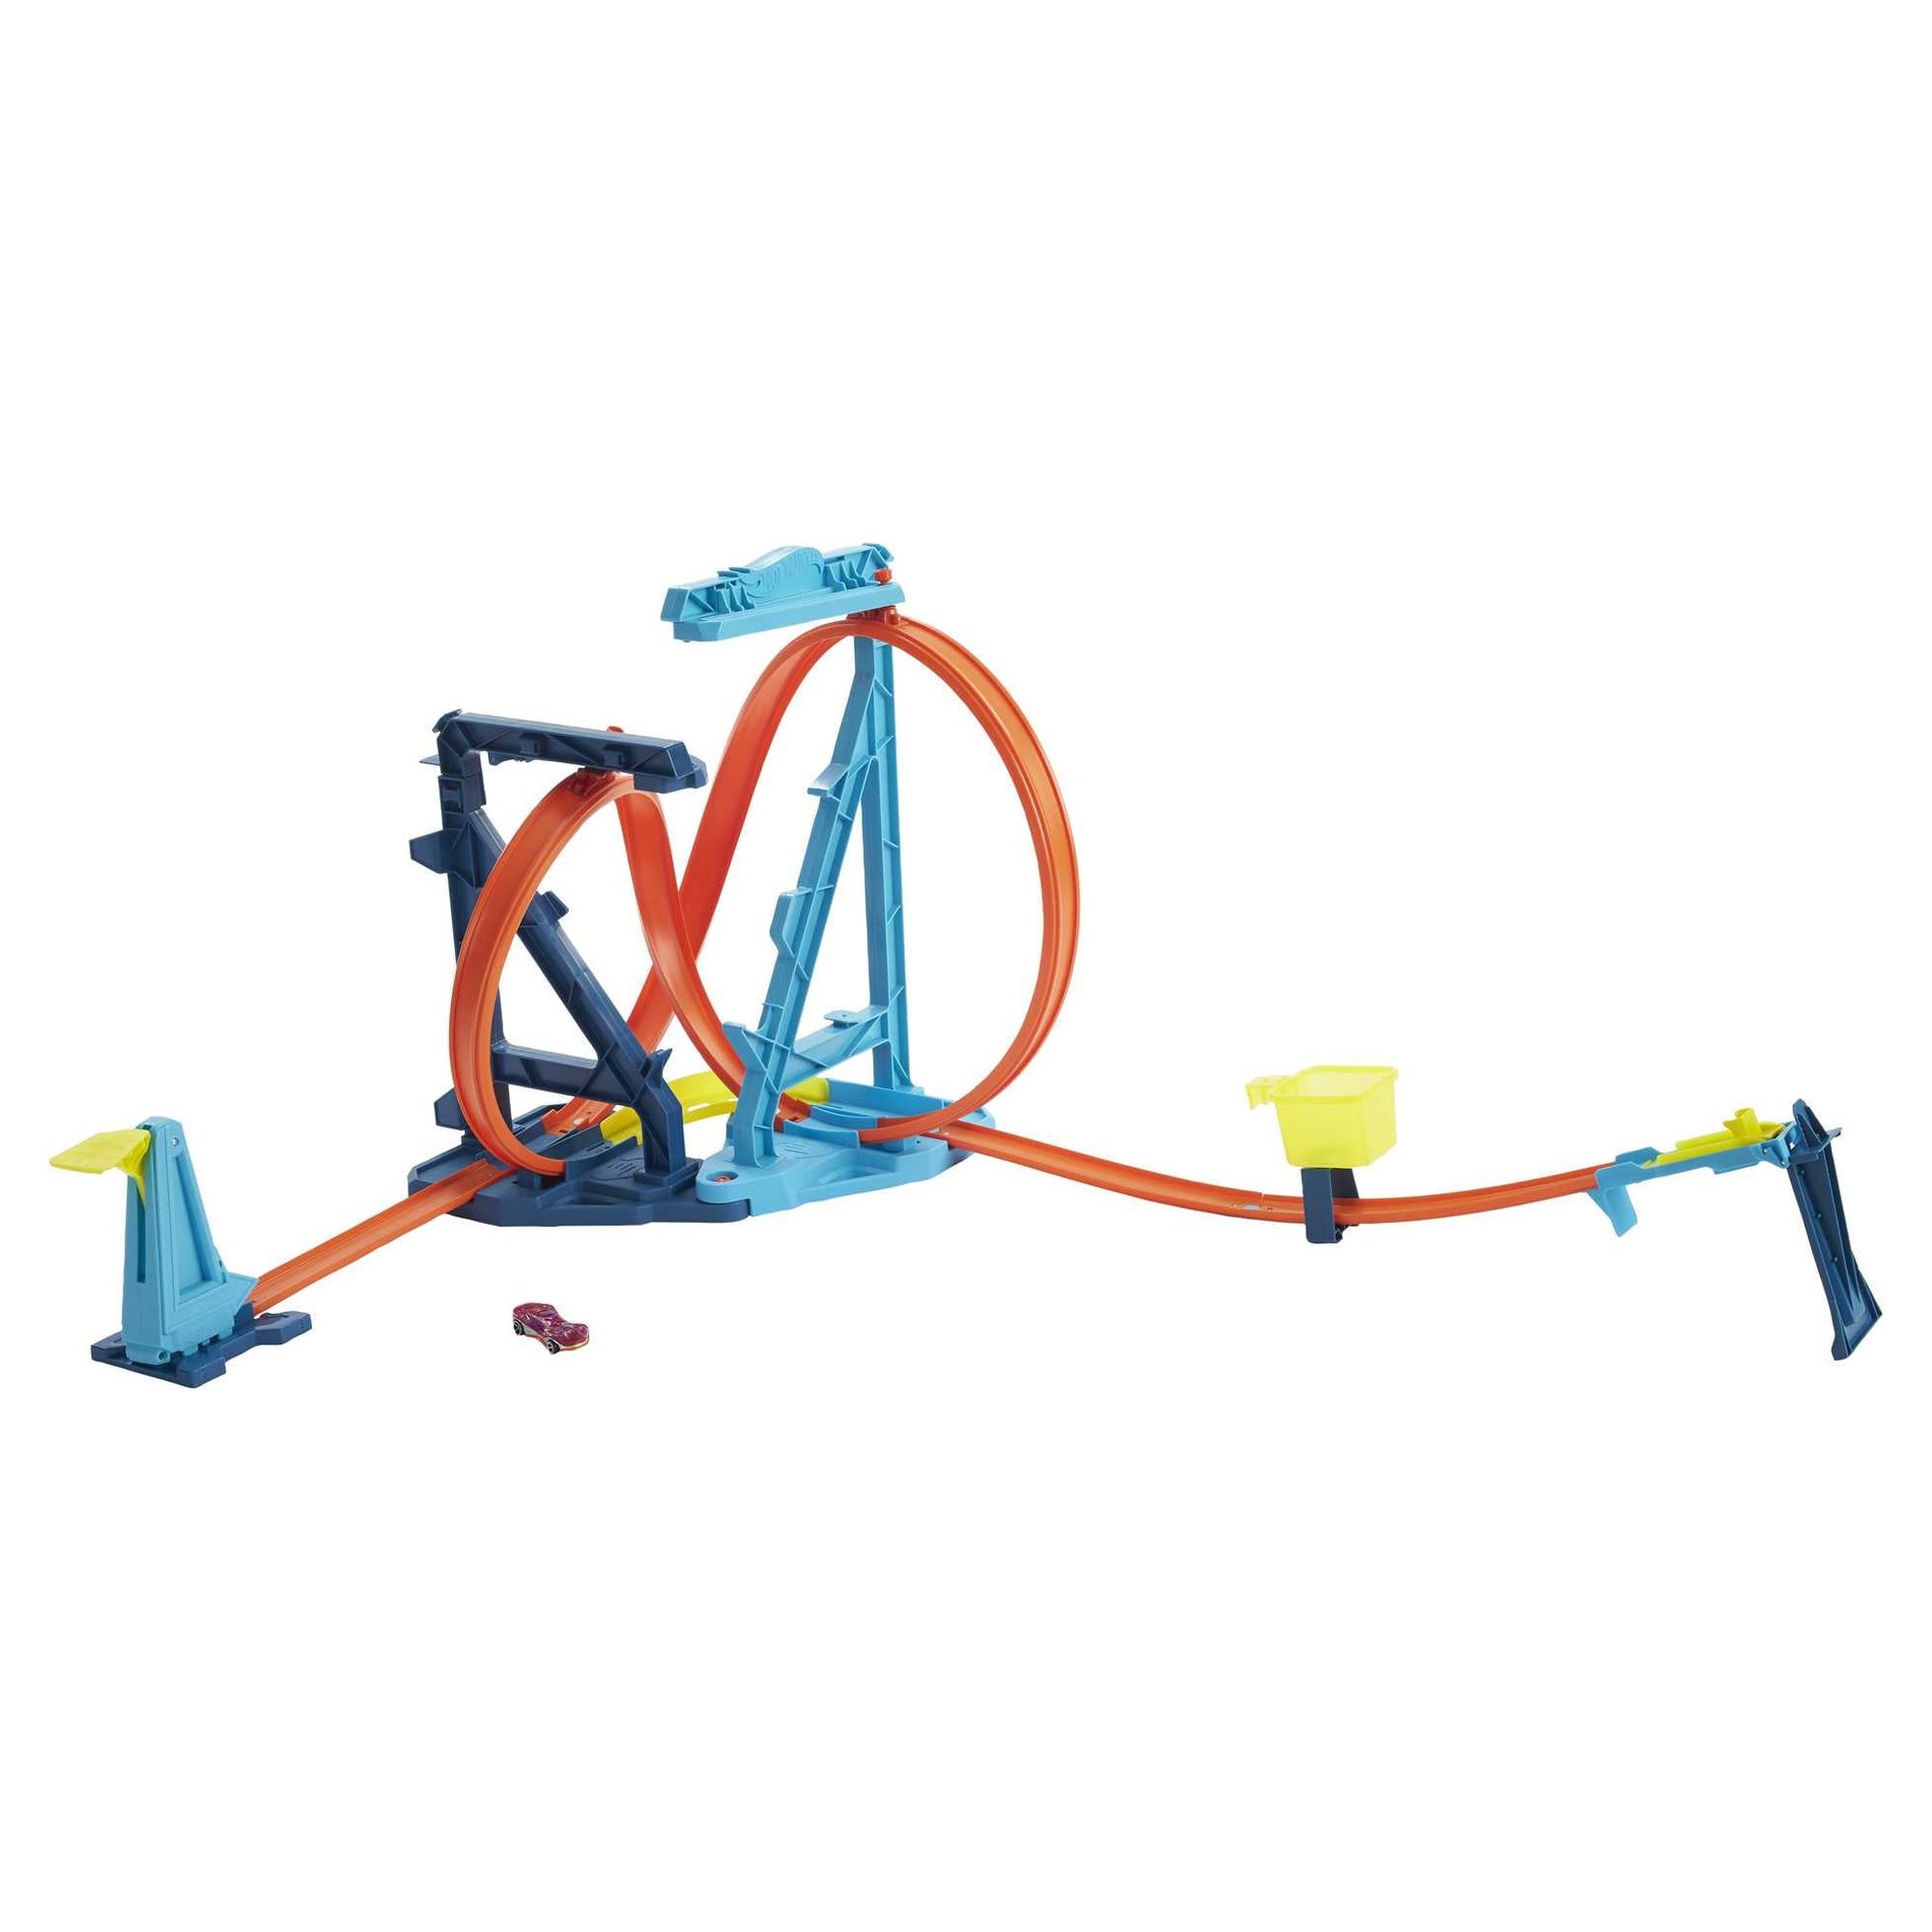 Hot Wheels Track Builder Unlimited Infinity Loop Kit Track Set & 1 Toy Car In 1:64 Scale - image 1 of 7